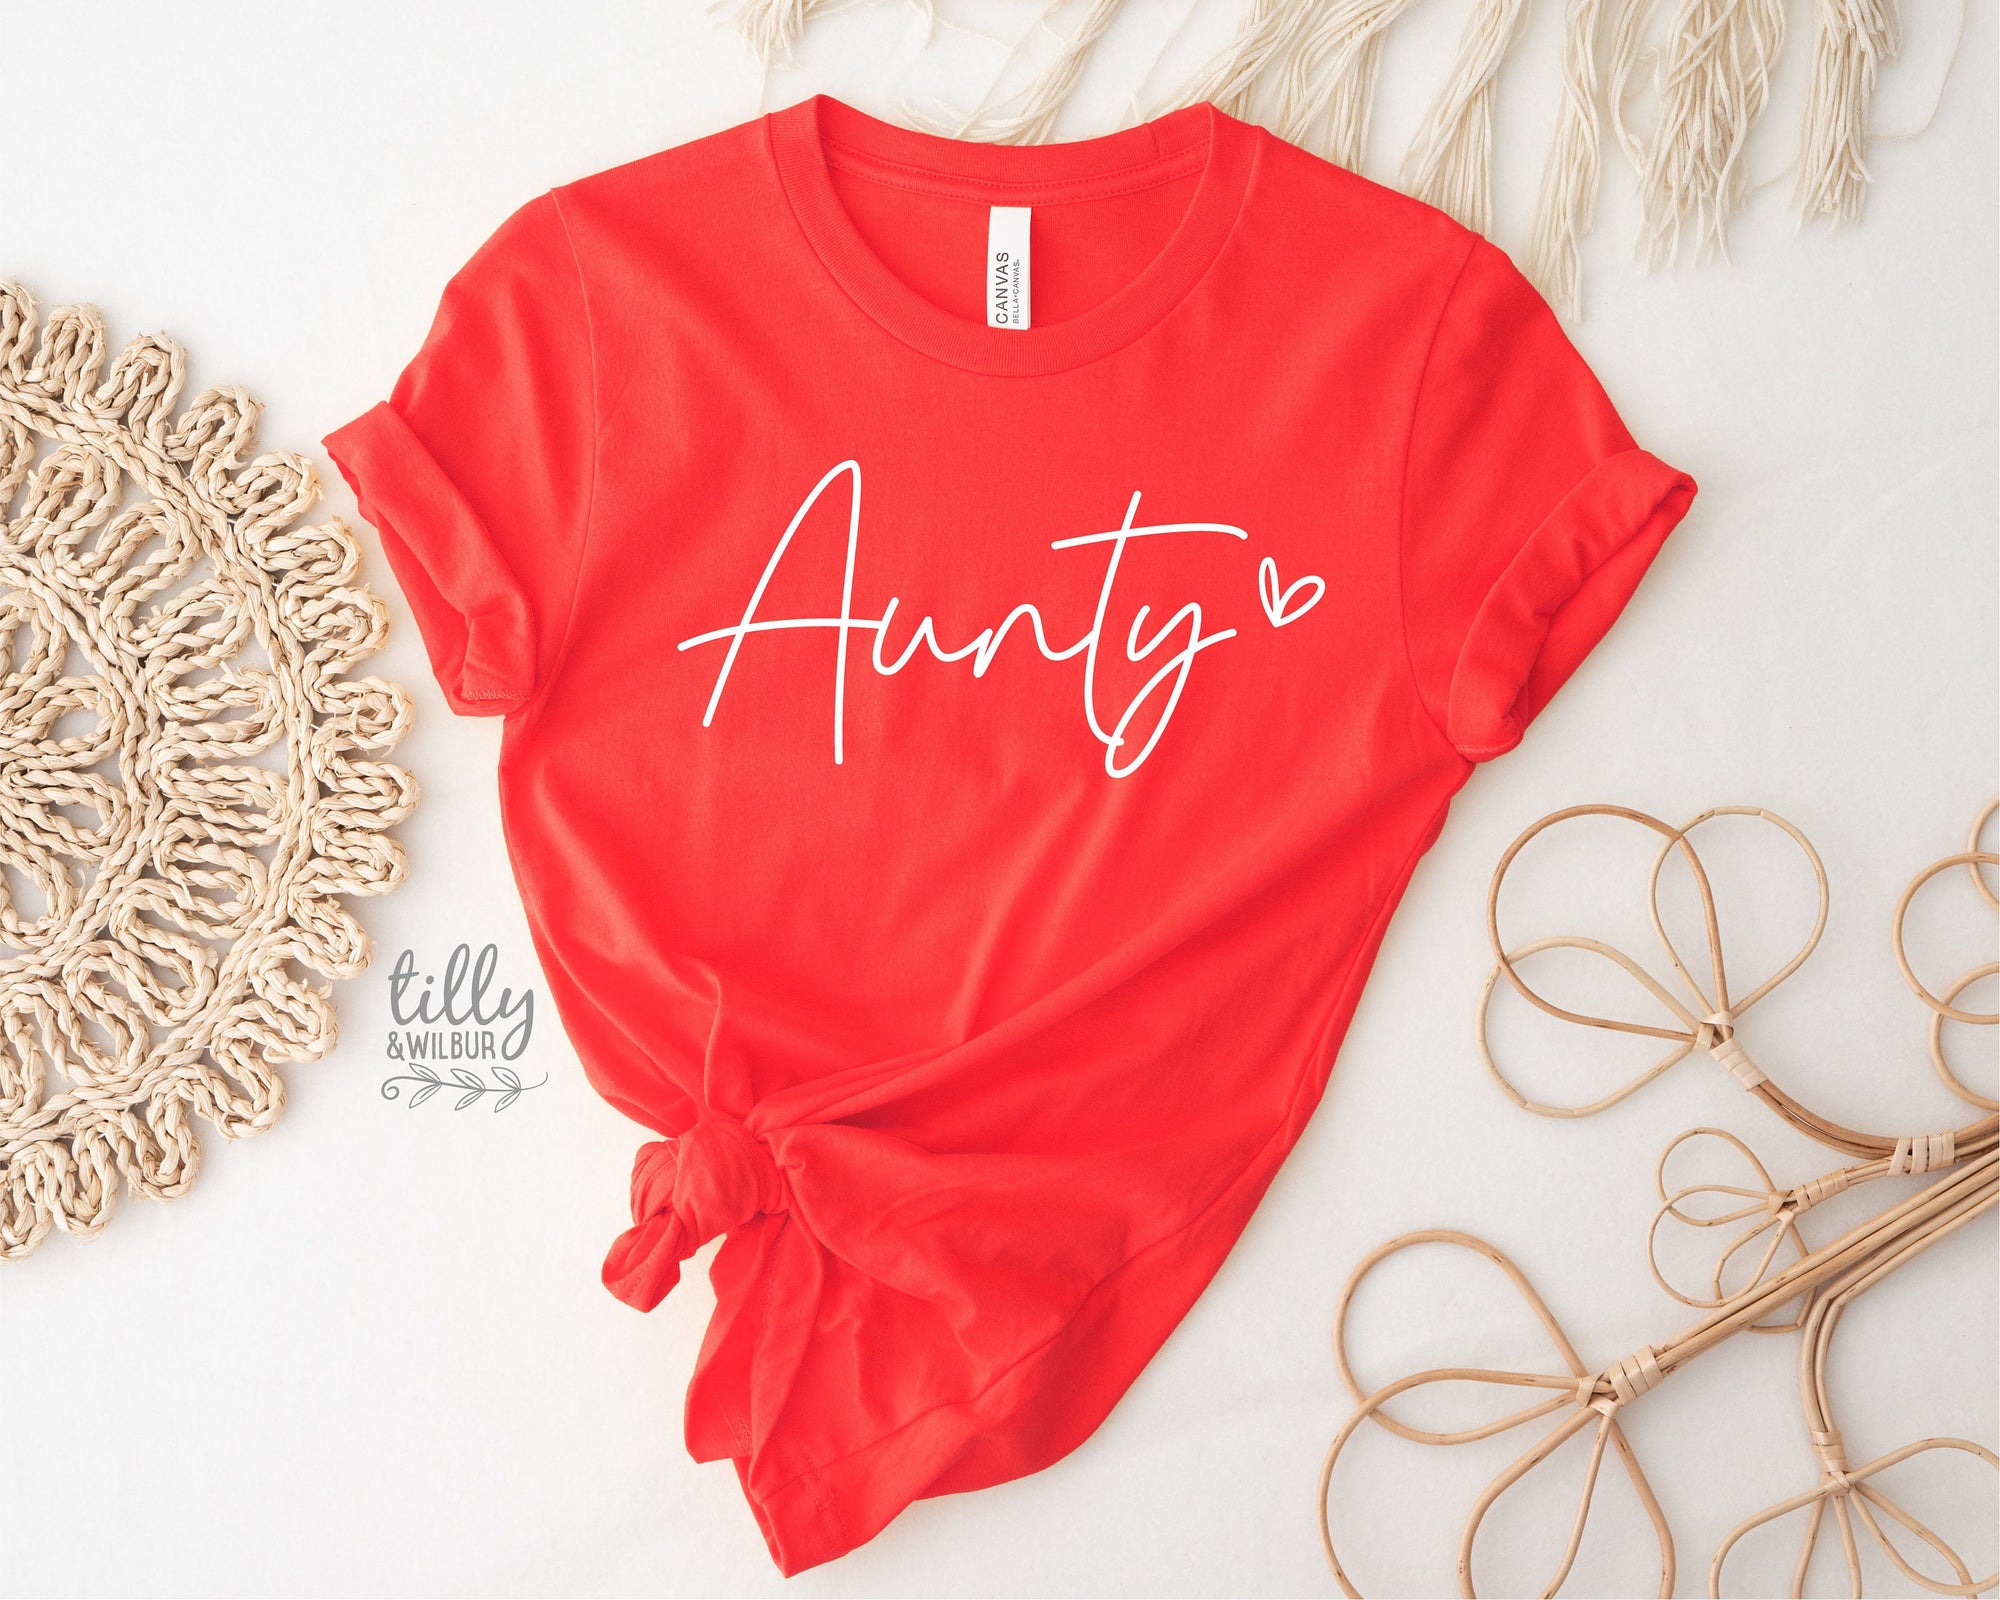 Aunty T-Shirt, Pregnancy Announcement T-Shirt, I'm Going To Be An Aunty, Baby Shower Gift, Aunty, Auntie, Sister Gift, Red With White